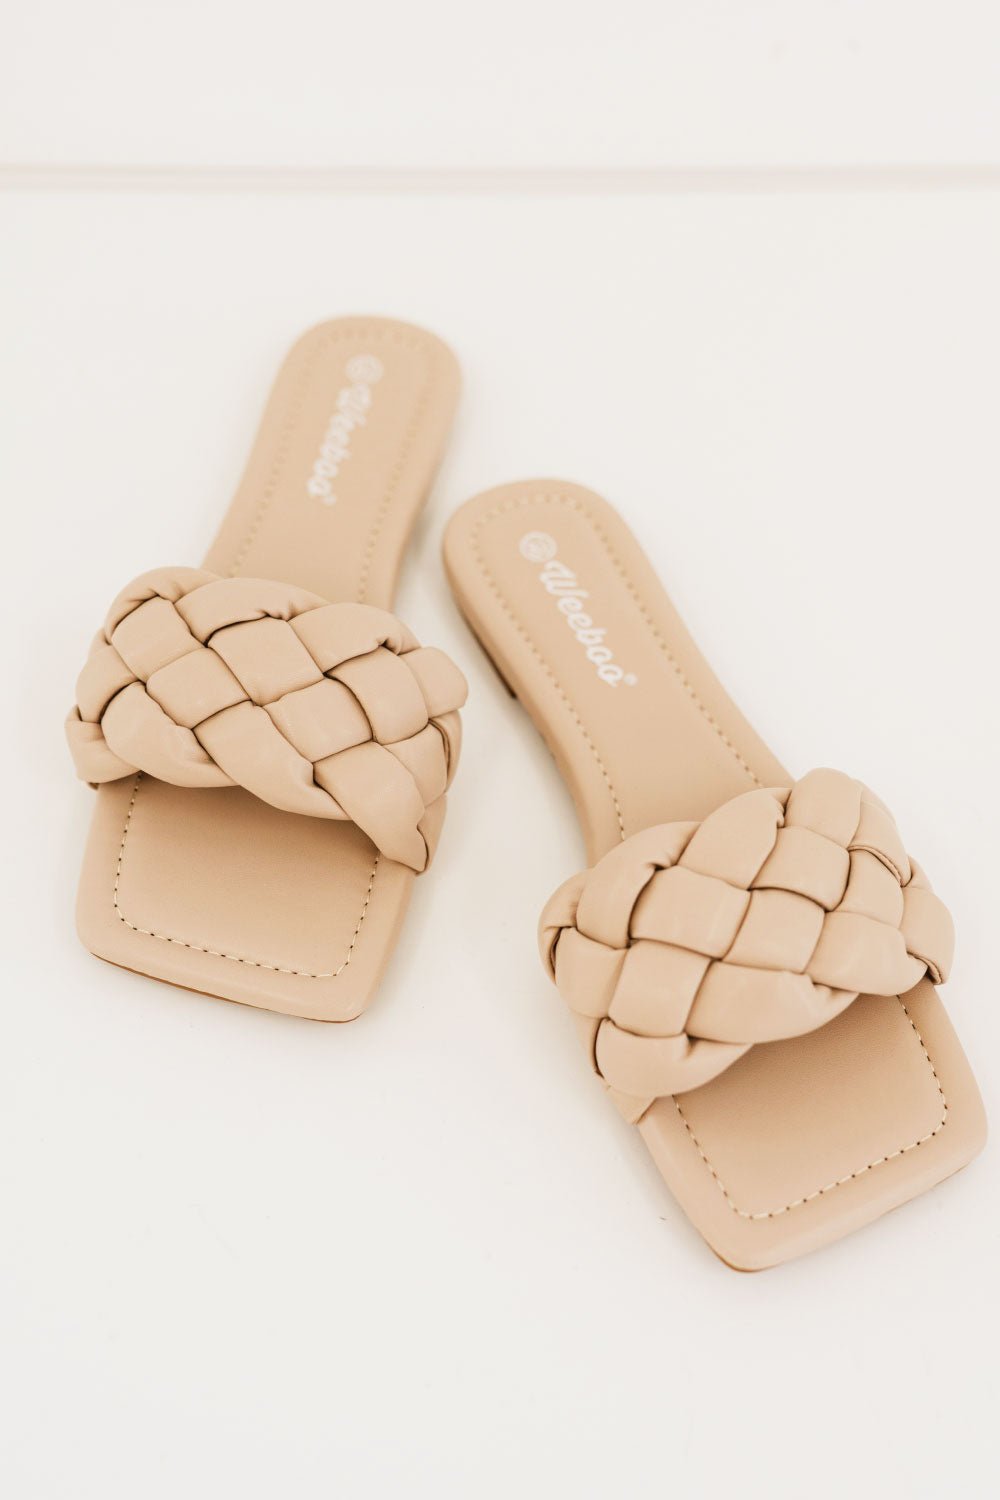 Weeboo Cakewalk Woven Square Toe Slides - Fashion Girl Online Store